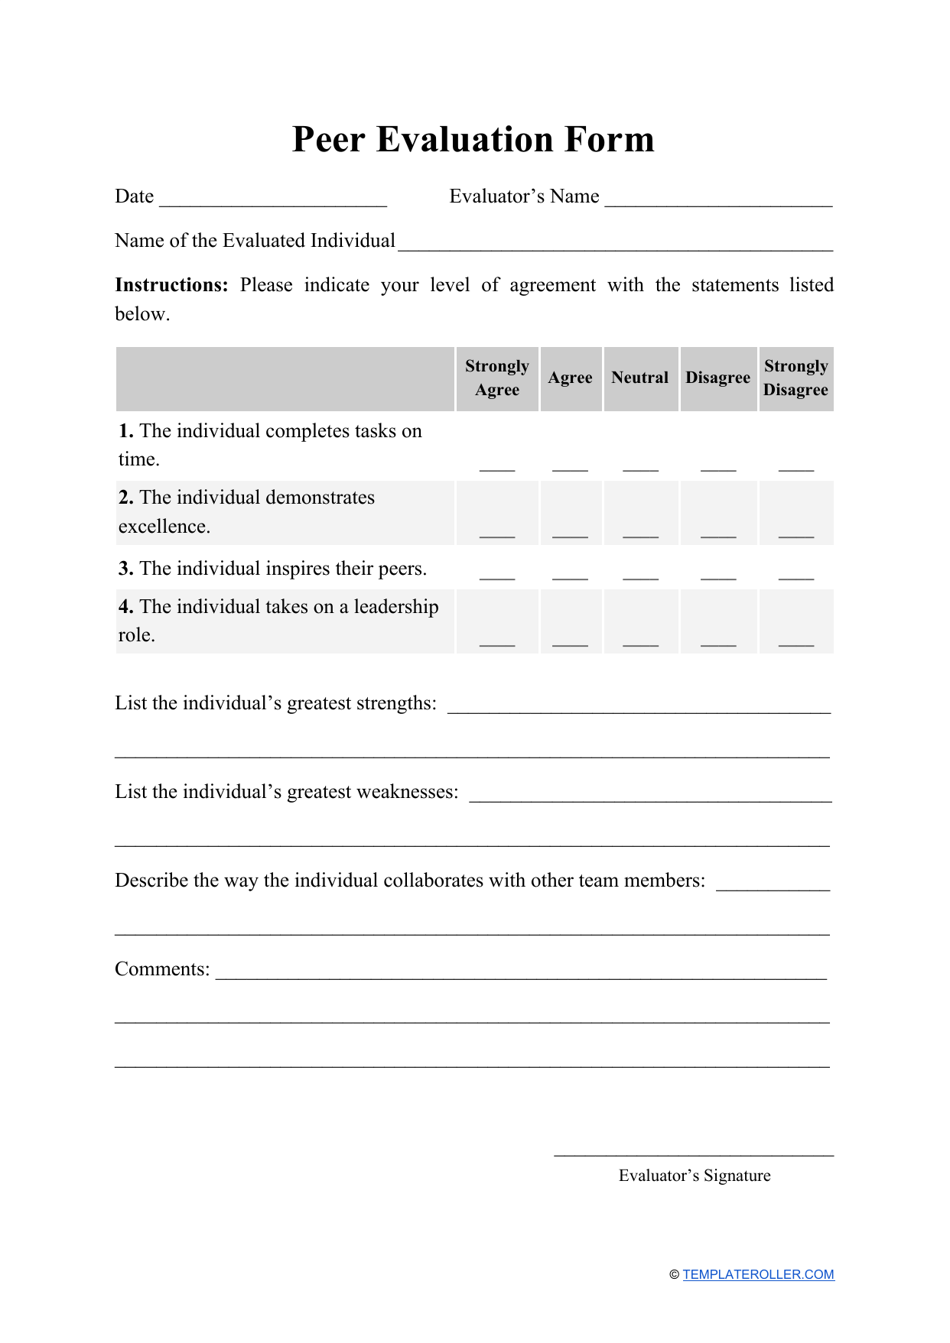 Peer Evaluation Form, Page 1